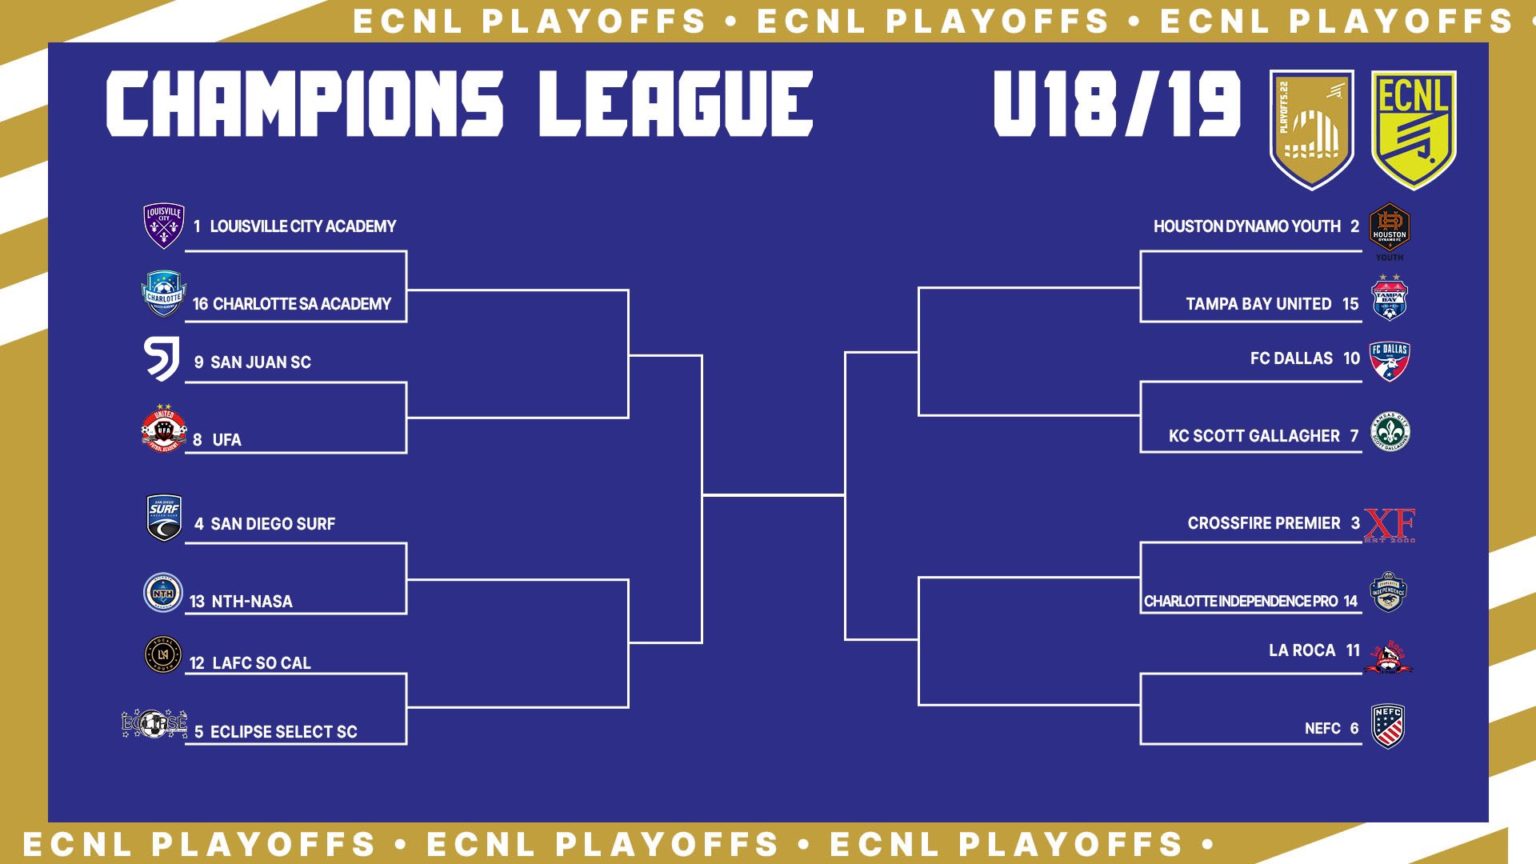 Groups and schedule revealed for 2022 ECNL Boys National Playoffs in